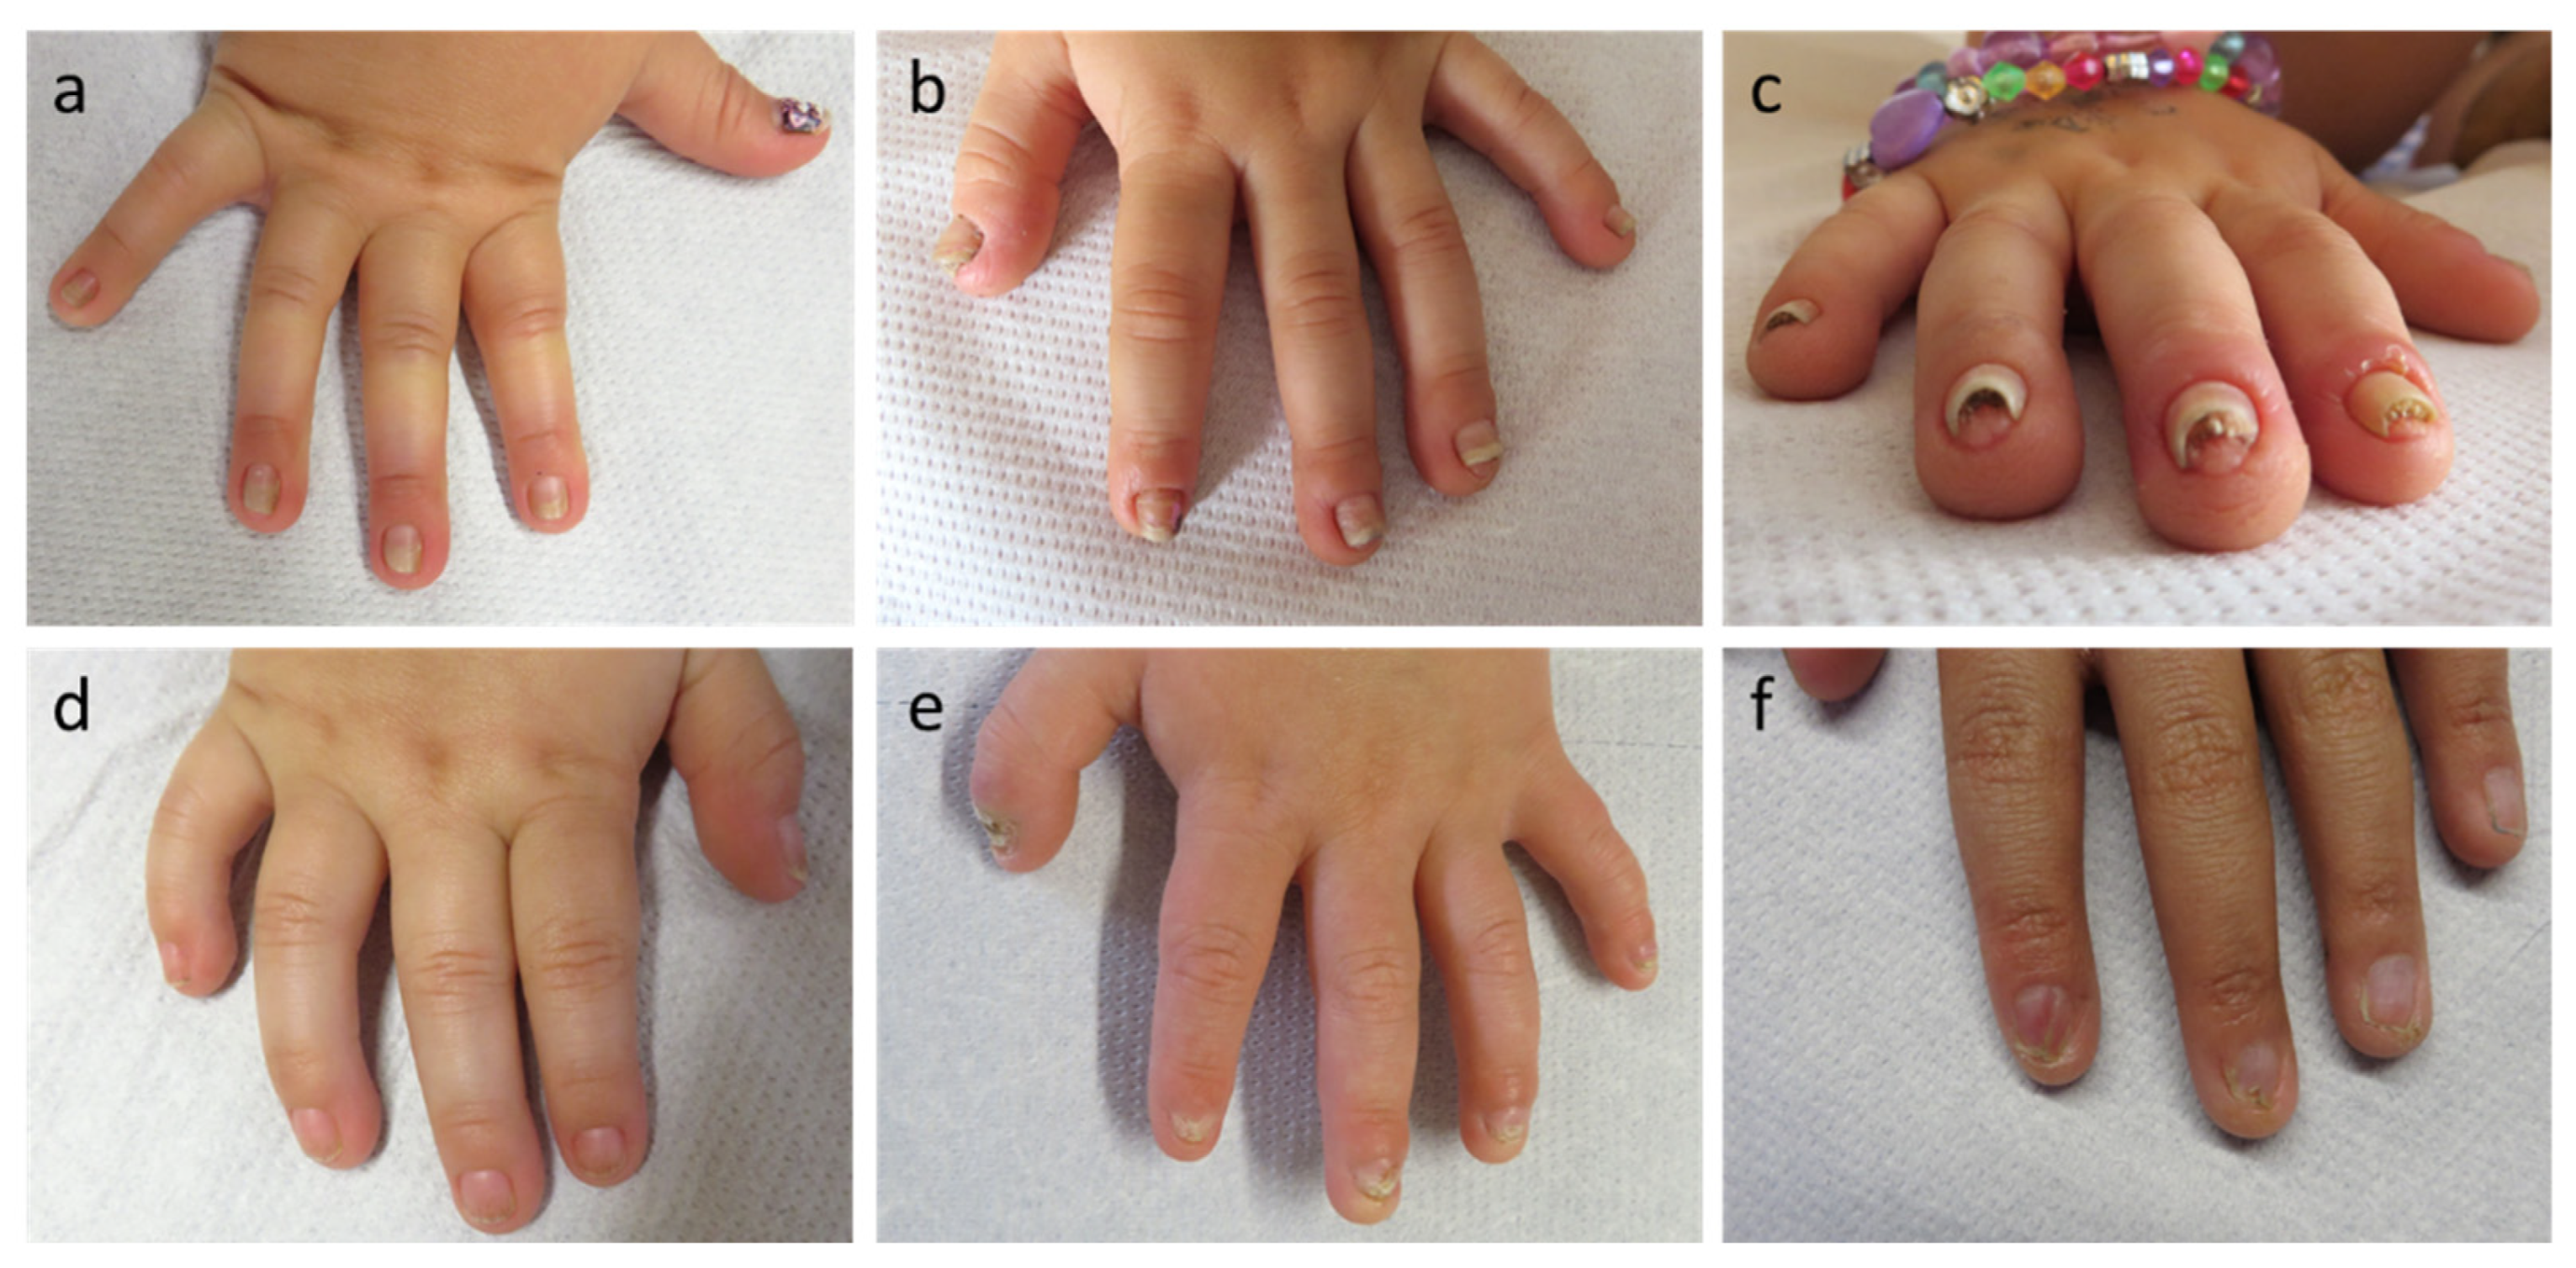 Nail Bed Pathologies: What To Look For | Steve Gallik